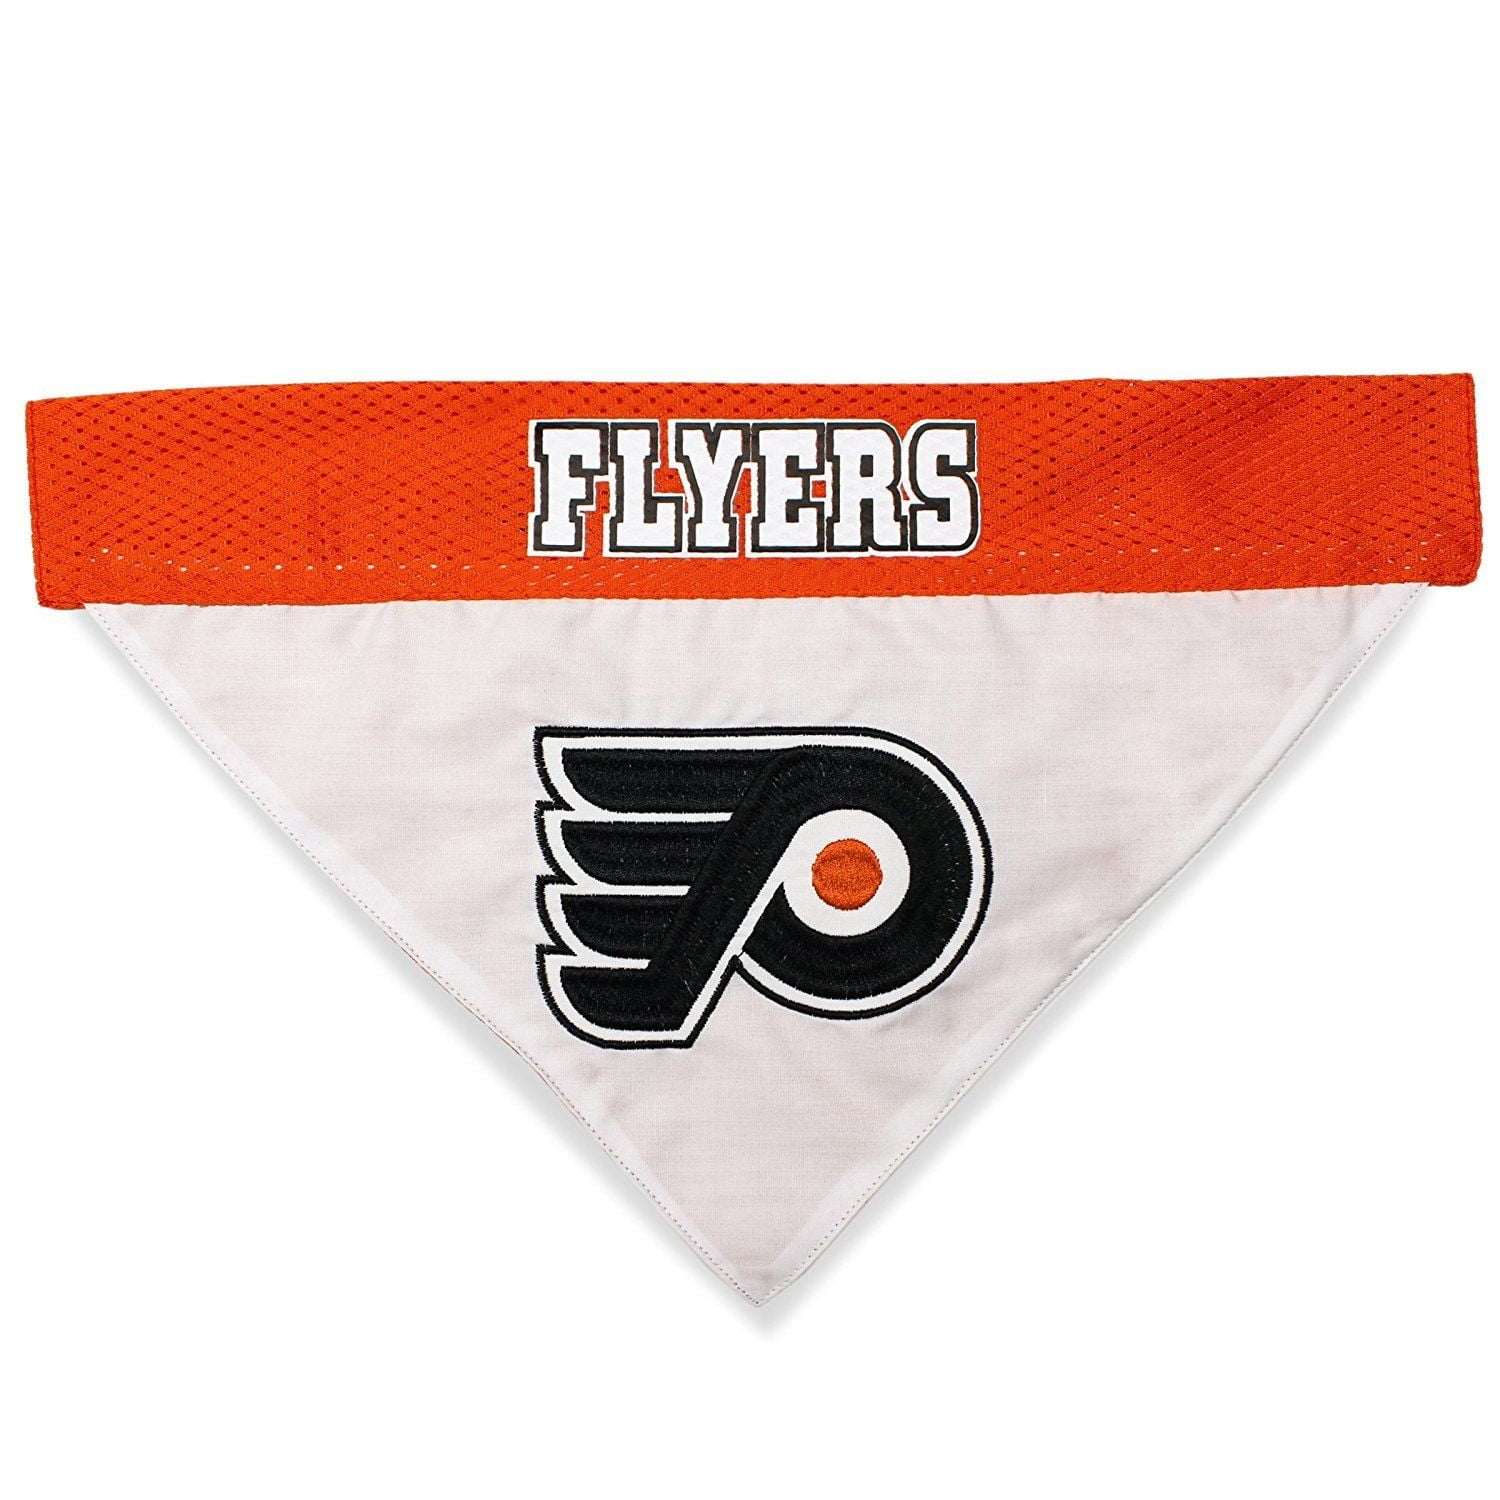  Pets First NHL Philadelphia Flyers Puck Toy for Dogs